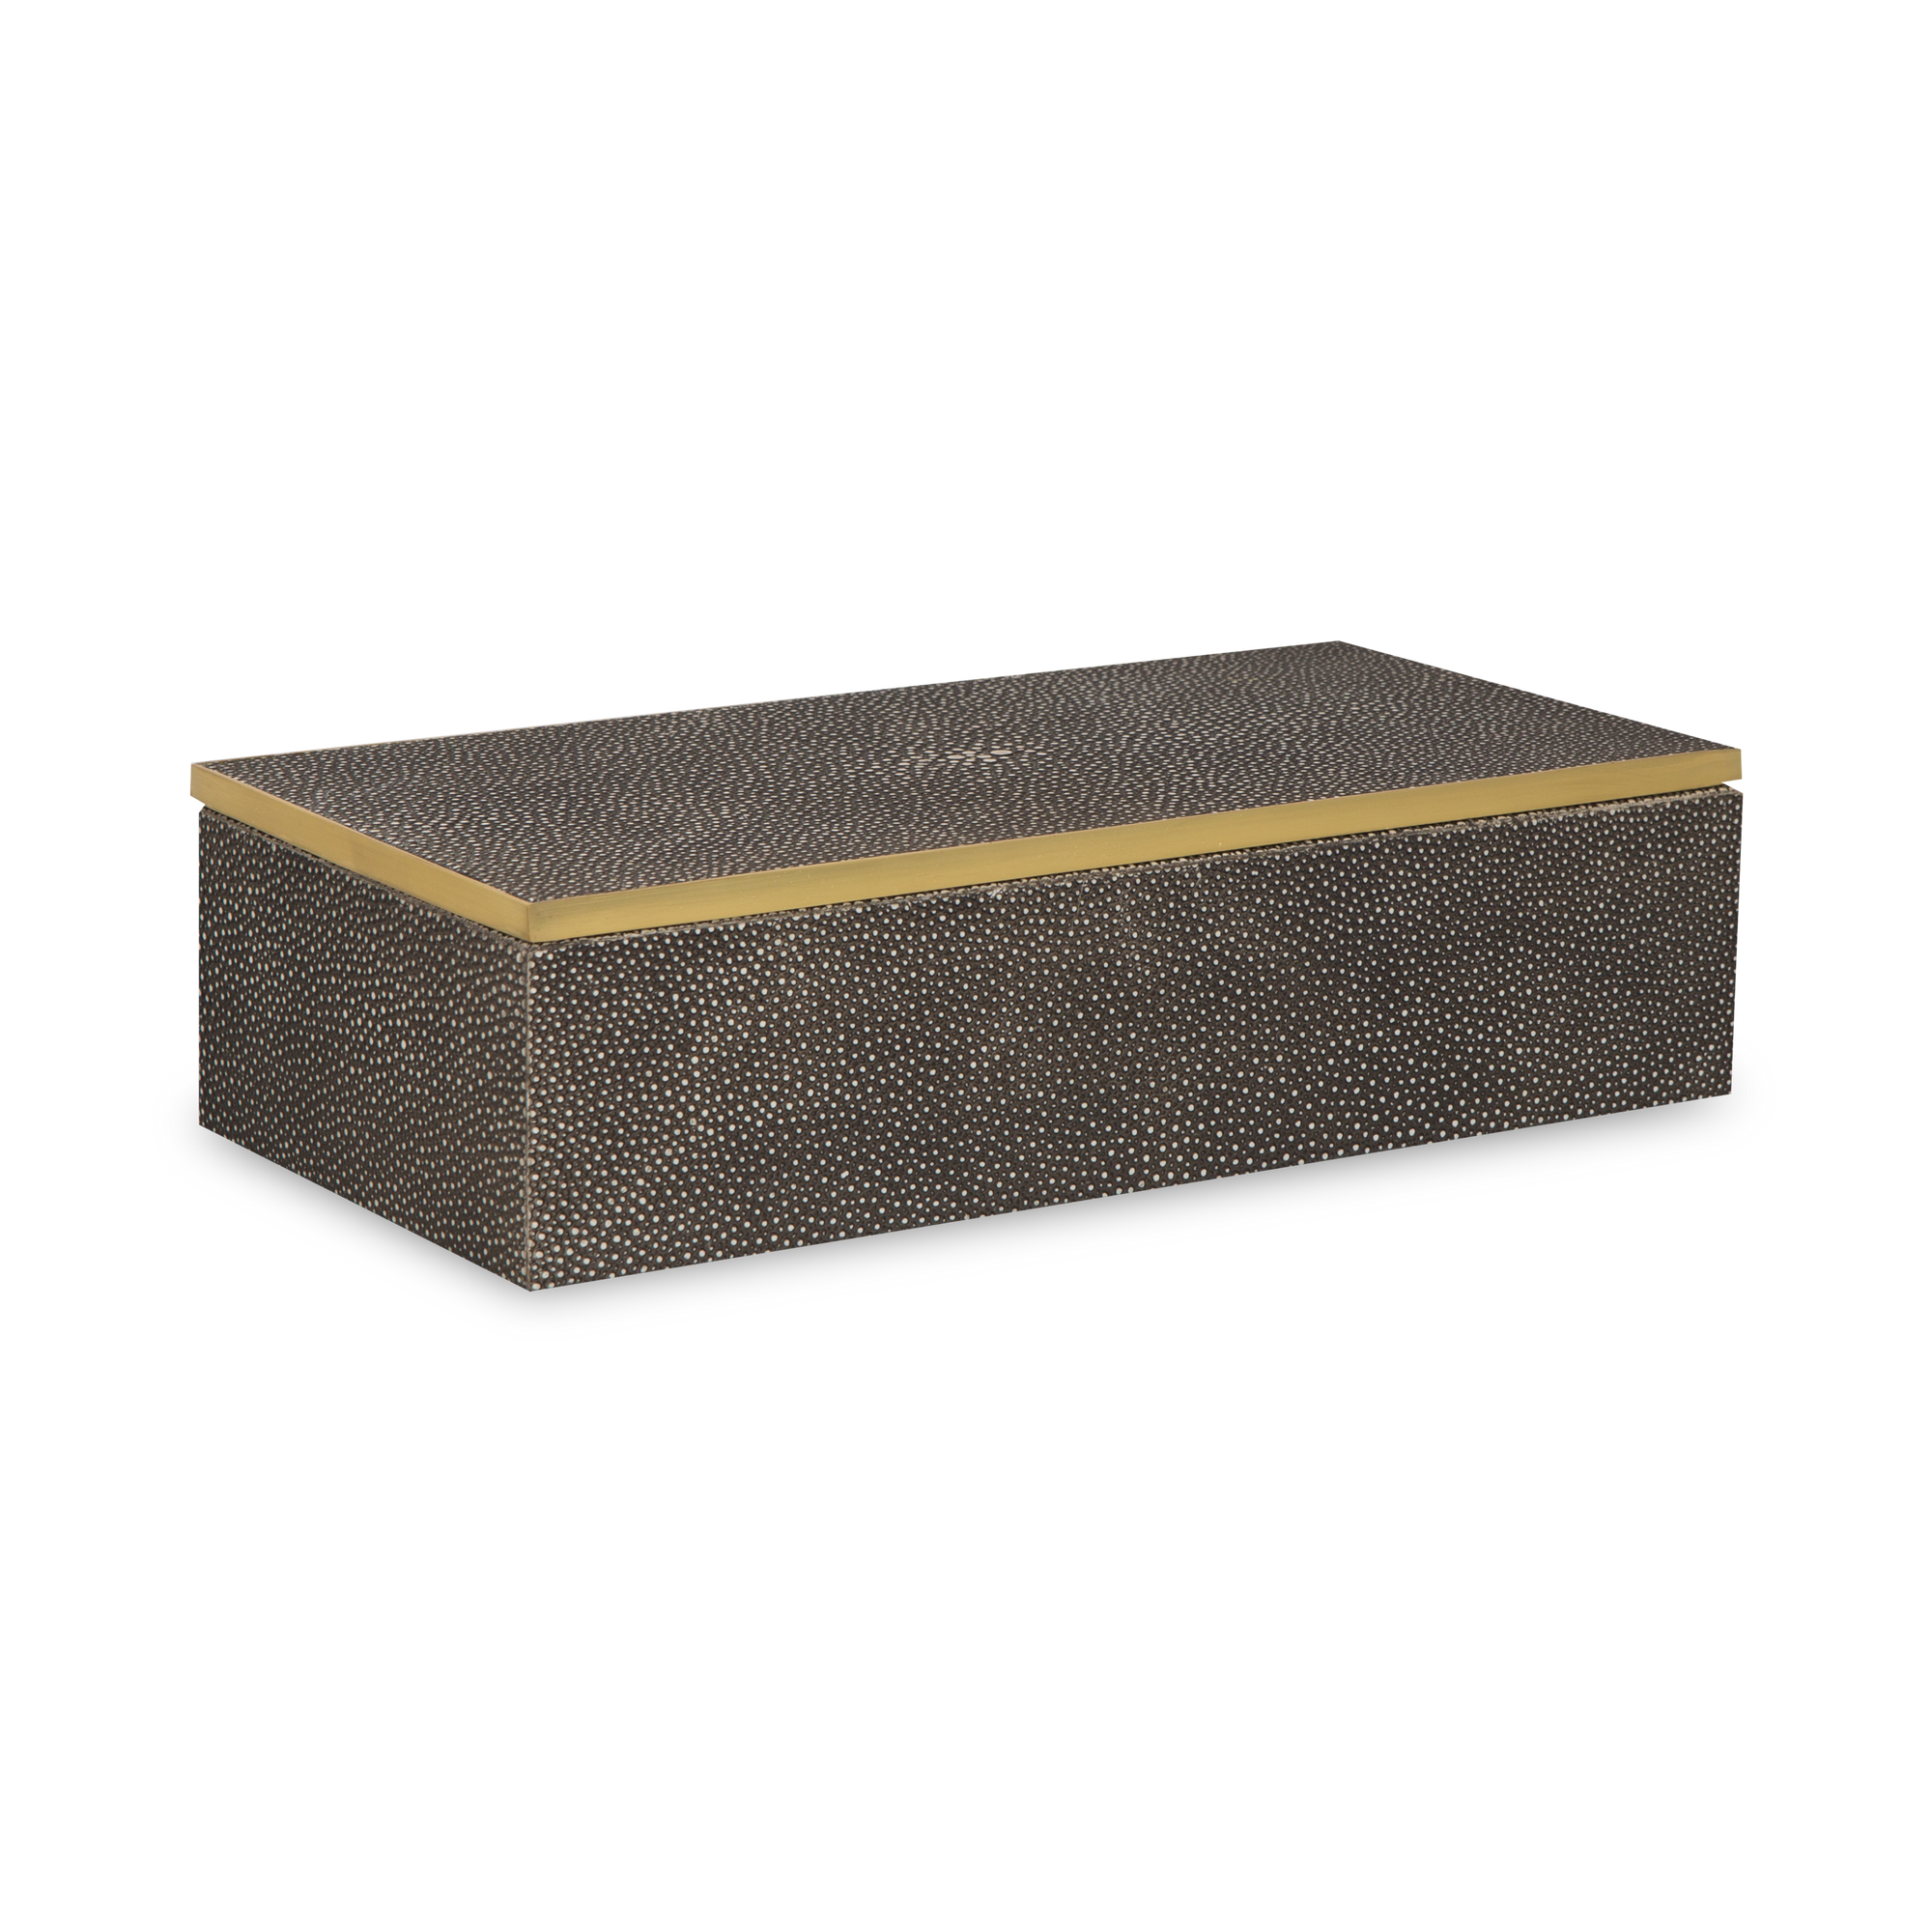 Stay organized with this  box wrapped in luxurious shagreen with brass accents and velvet backing.